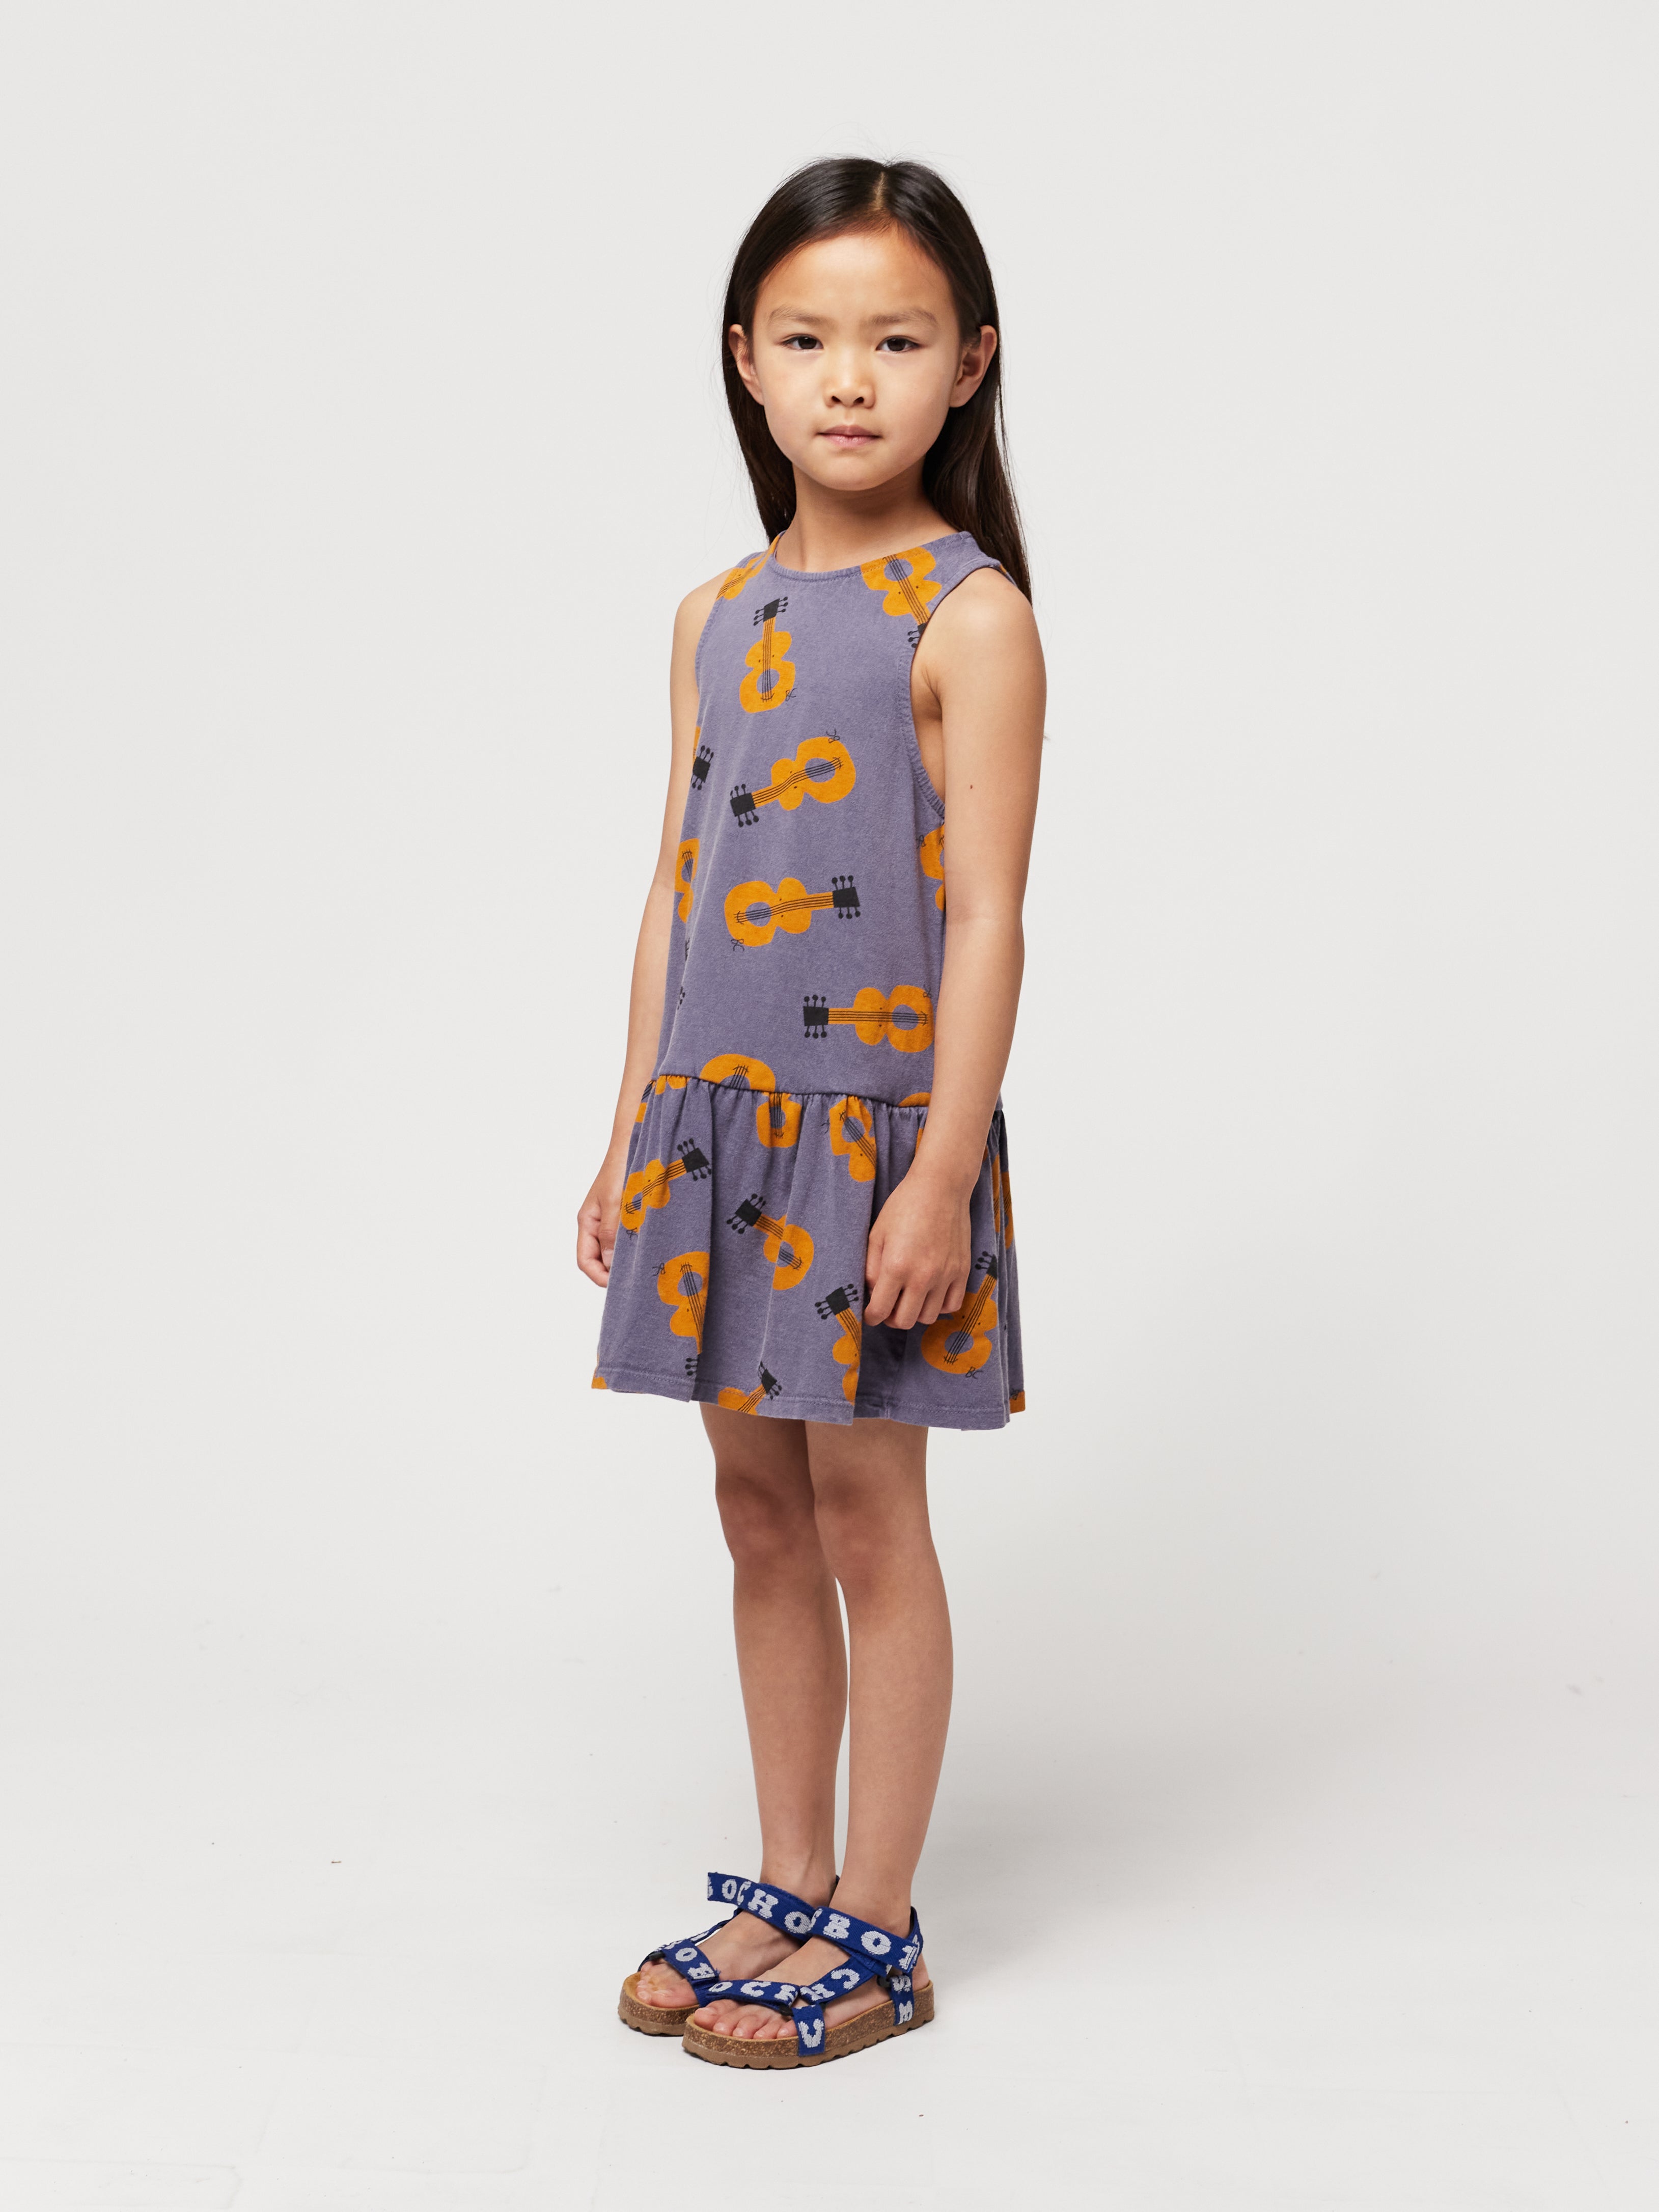 Bobo Choses Acoustic Guitar All Over Dress - Prussian Blue